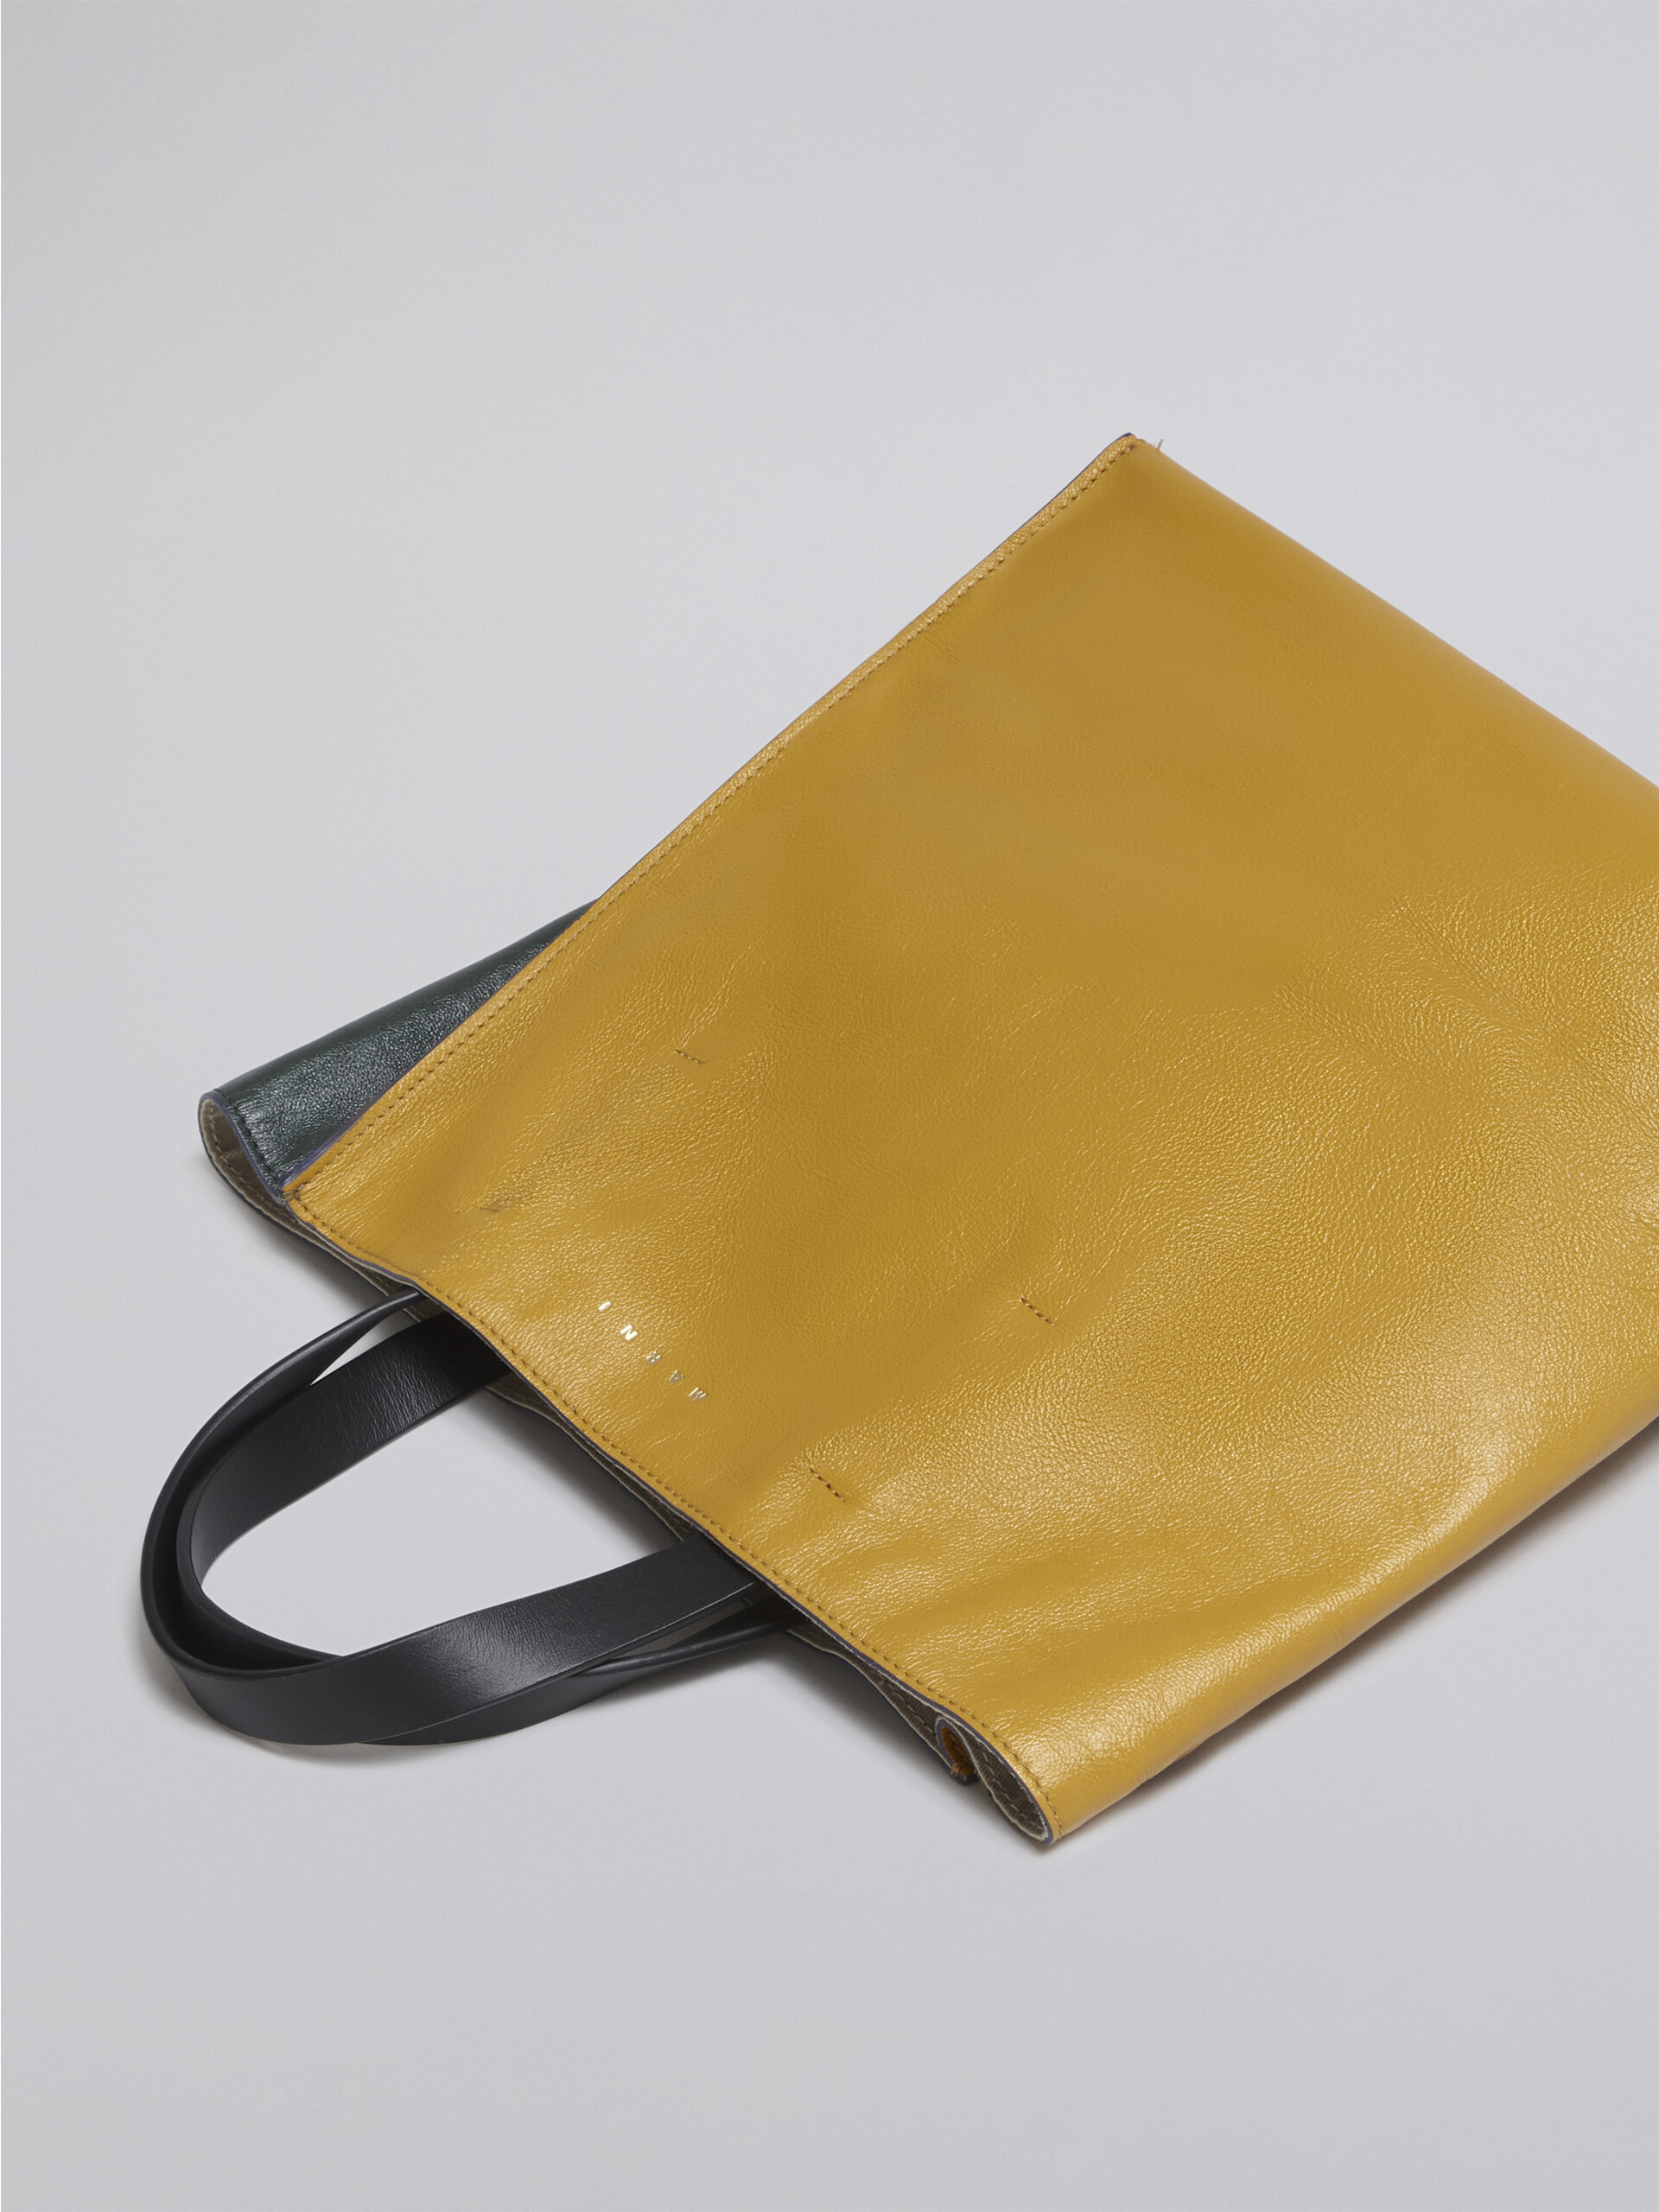 MUSEO SOFT small bag in yellow and green leather | Marni